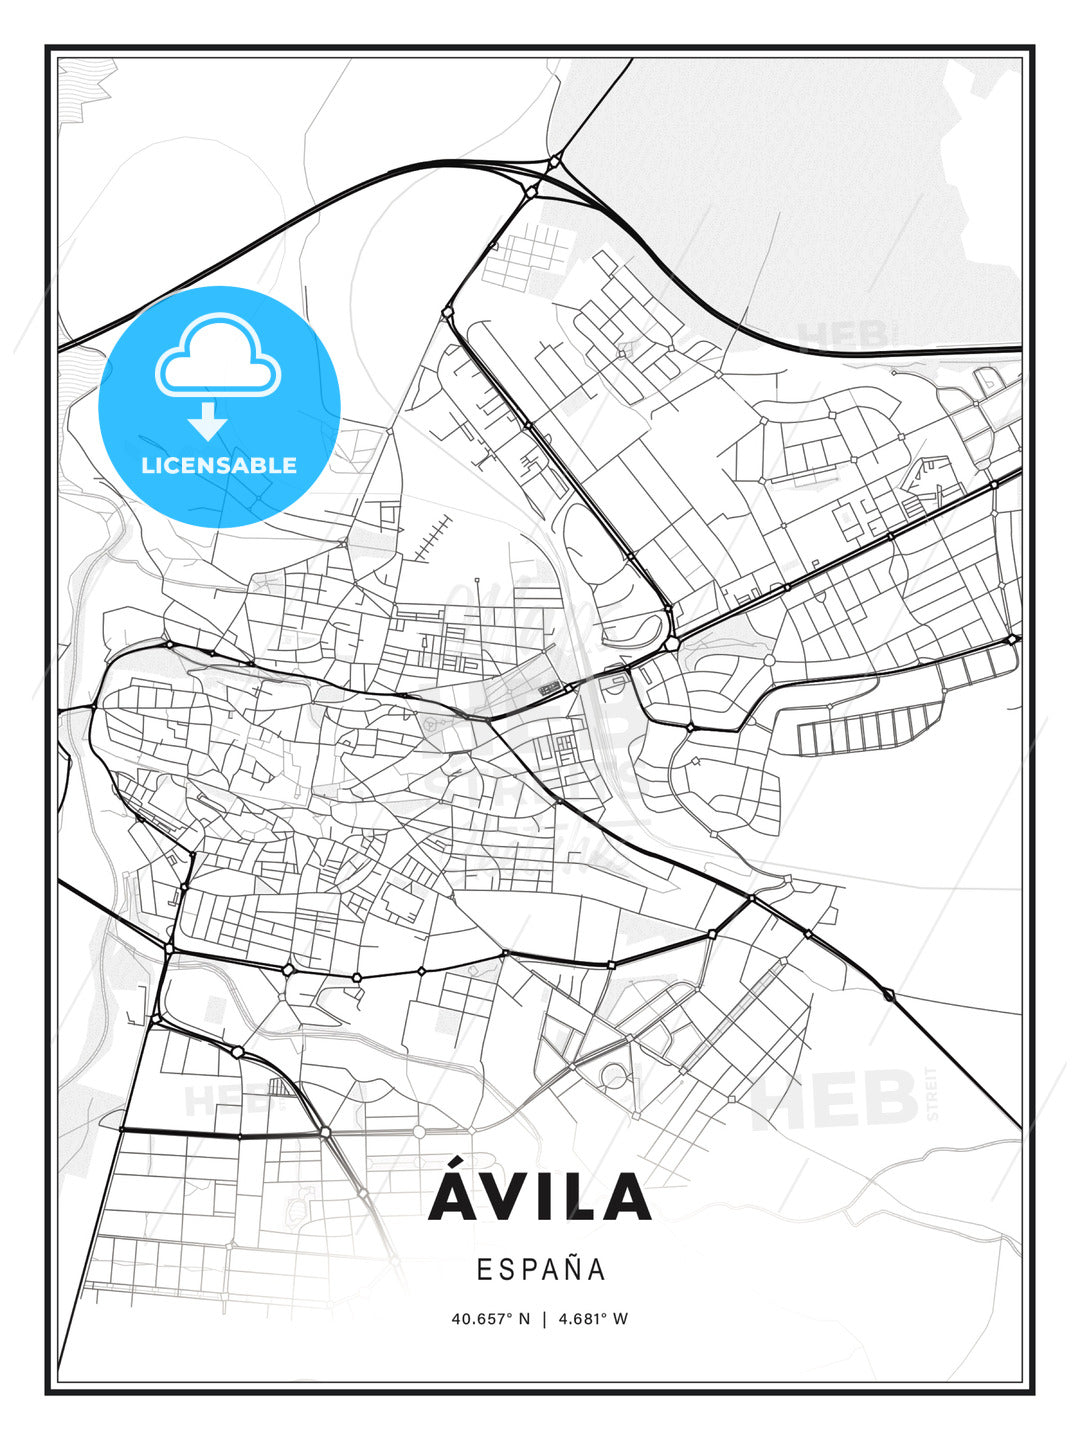 Ávila, Spain, Modern Print Template in Various Formats - HEBSTREITS Sketches